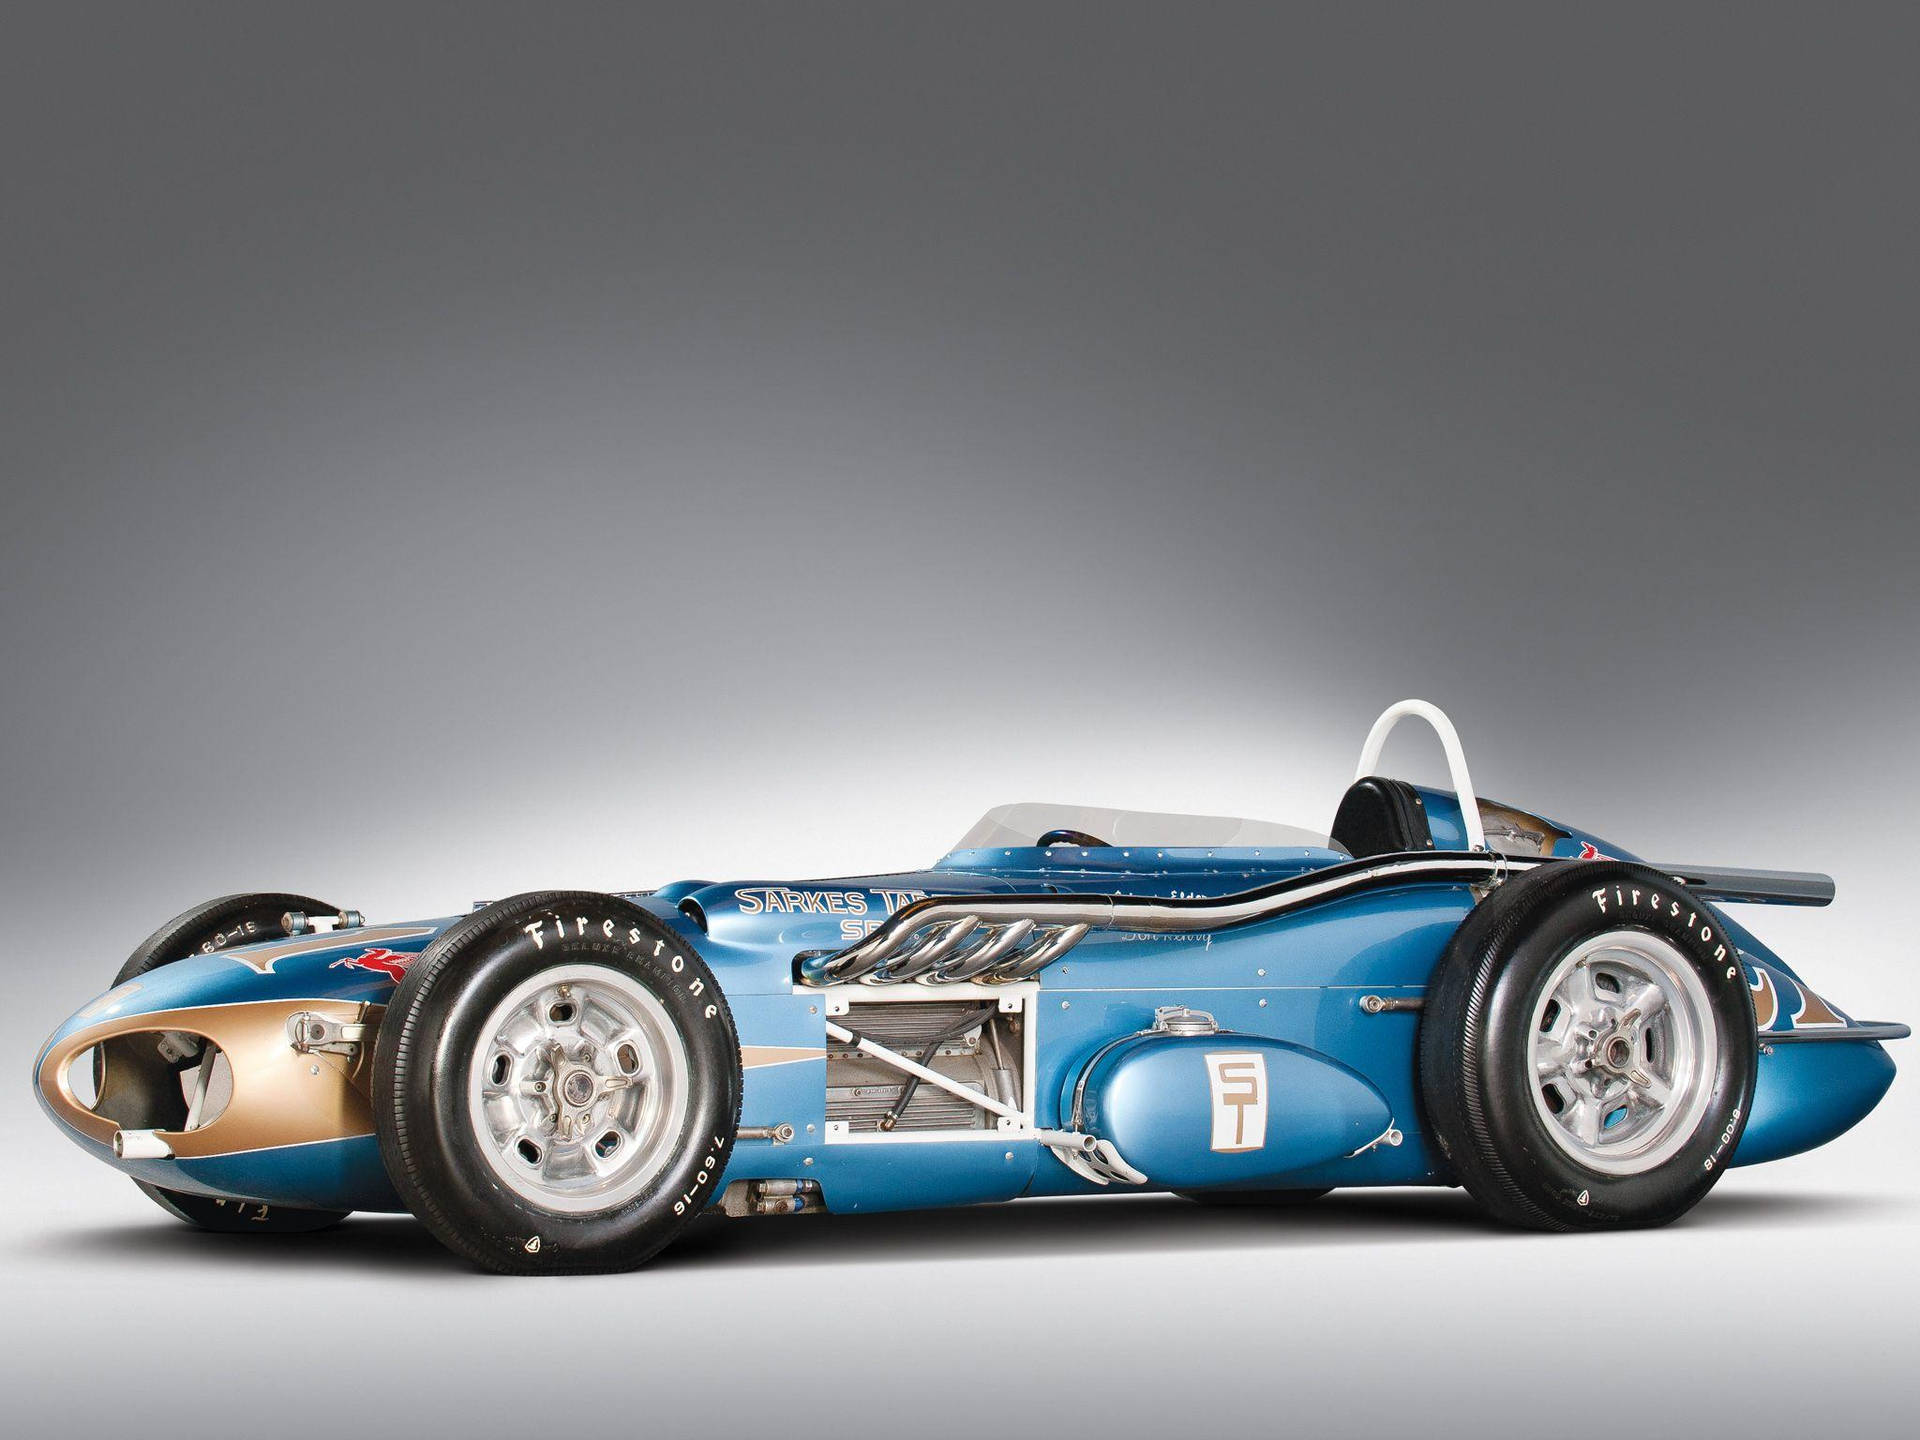 Classic Indianapolis 500 Blue Car Background